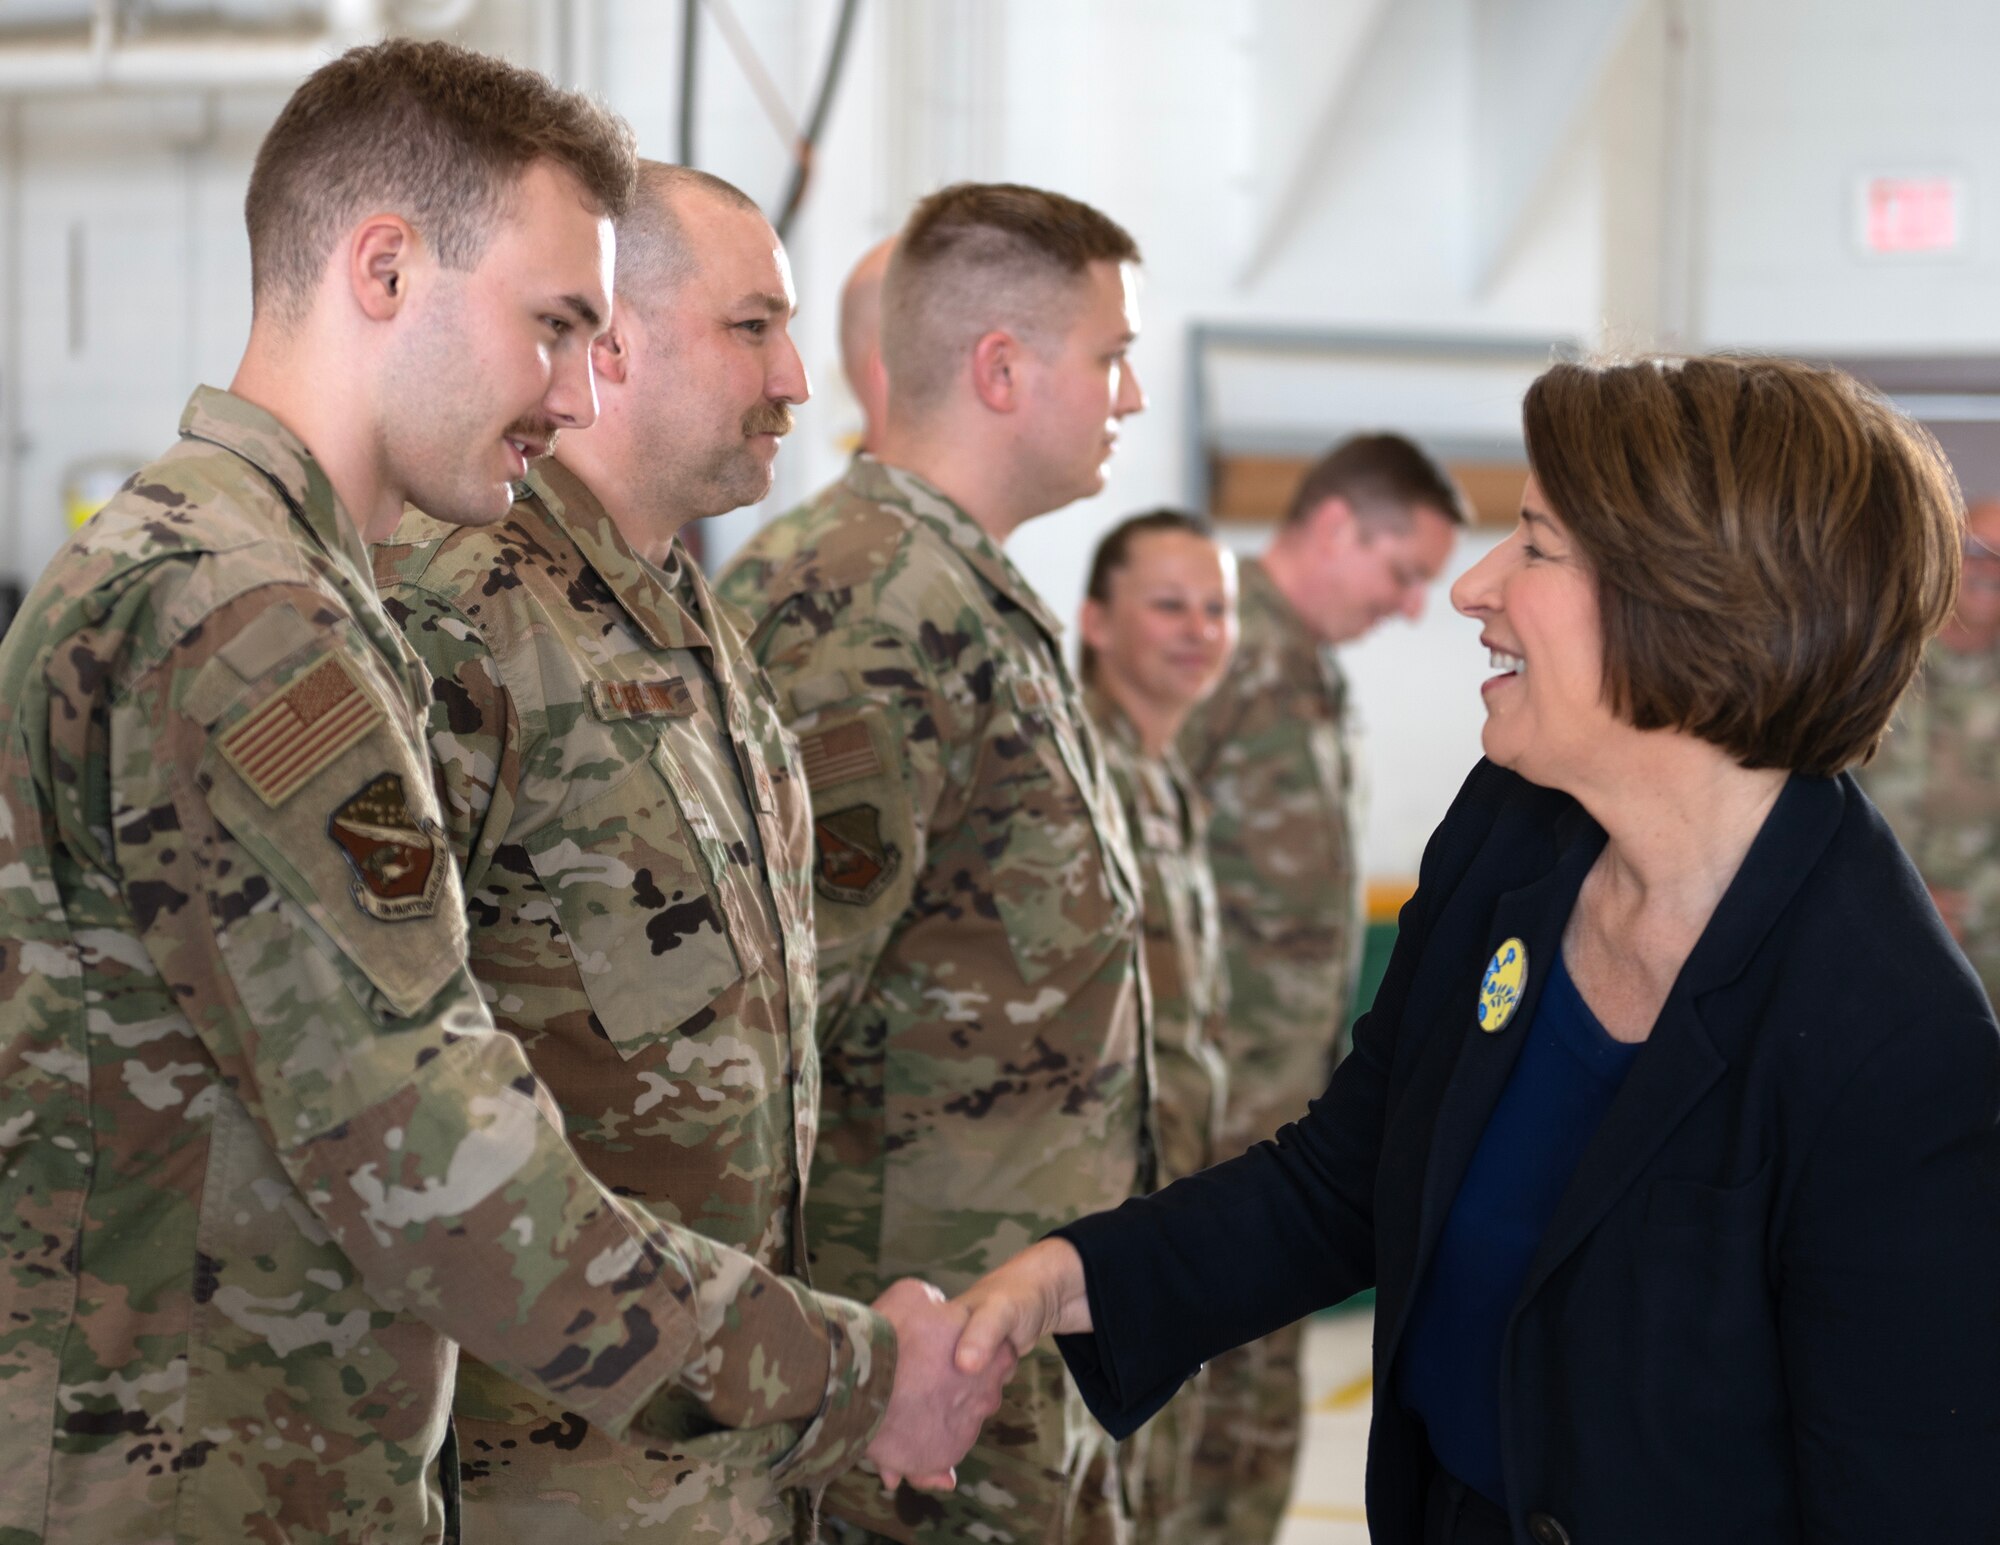 U.S. Sen. Amy Klobuchar, D-Minn., meets with U.S. Air Force Airmen from the 133rd Airlift Wing before a press conference in St. Paul, Minn., July 28, 2023.